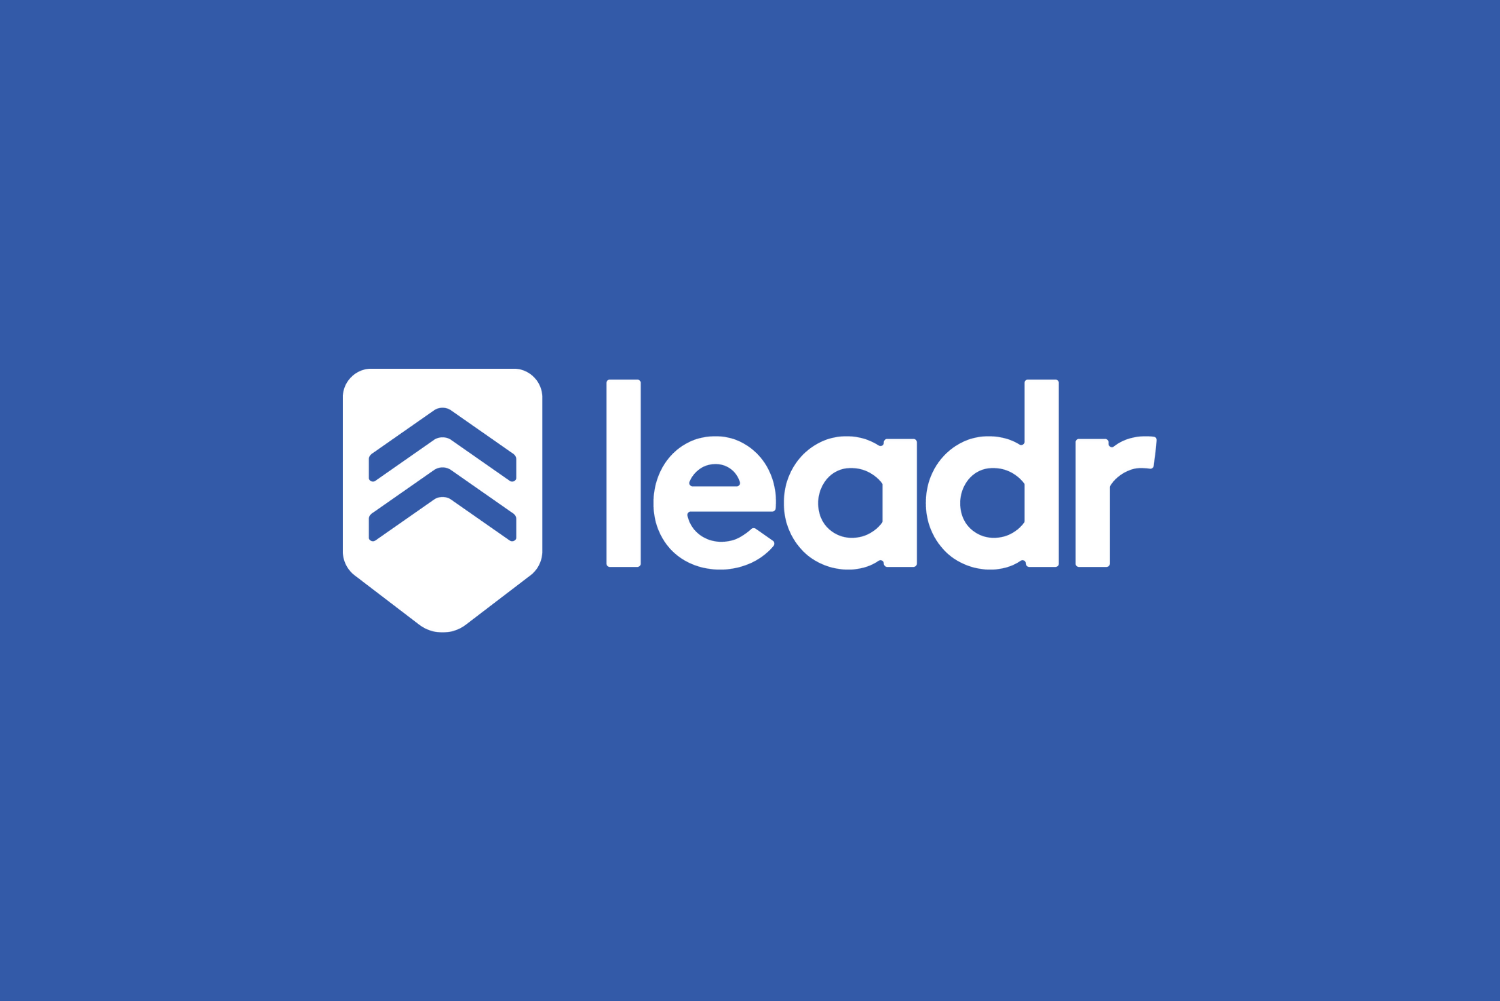 Introducing Leadr Home, the one-stop-shop to help you lead your team better than ever